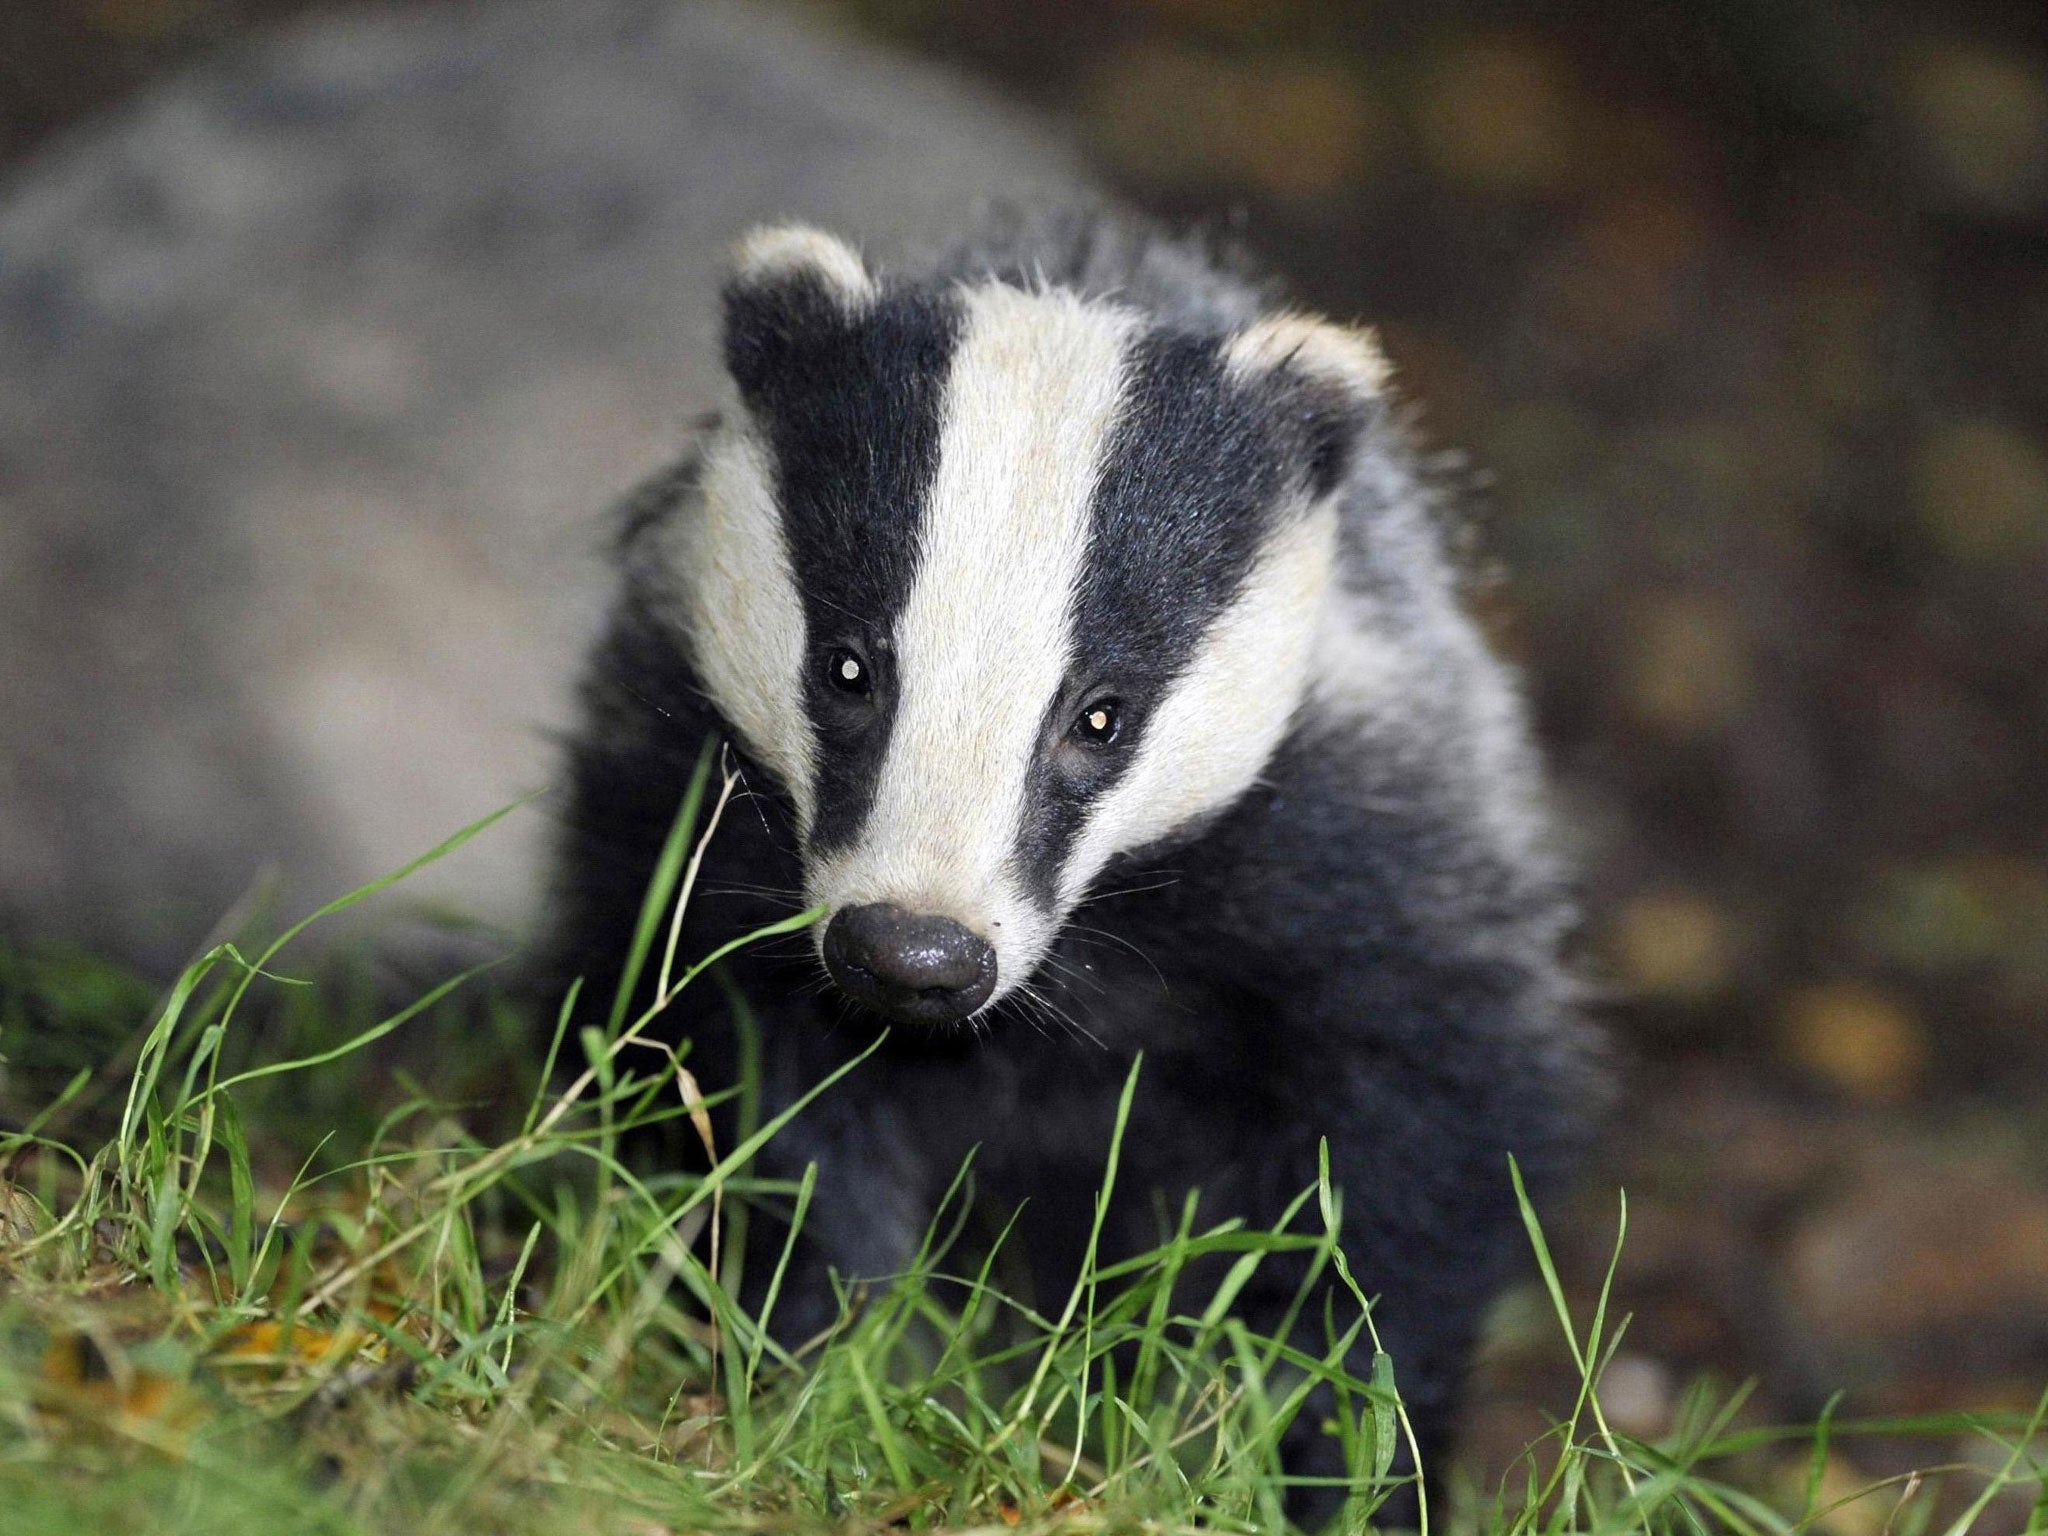 The cull has been branded expensive, ineffective, and inhumane